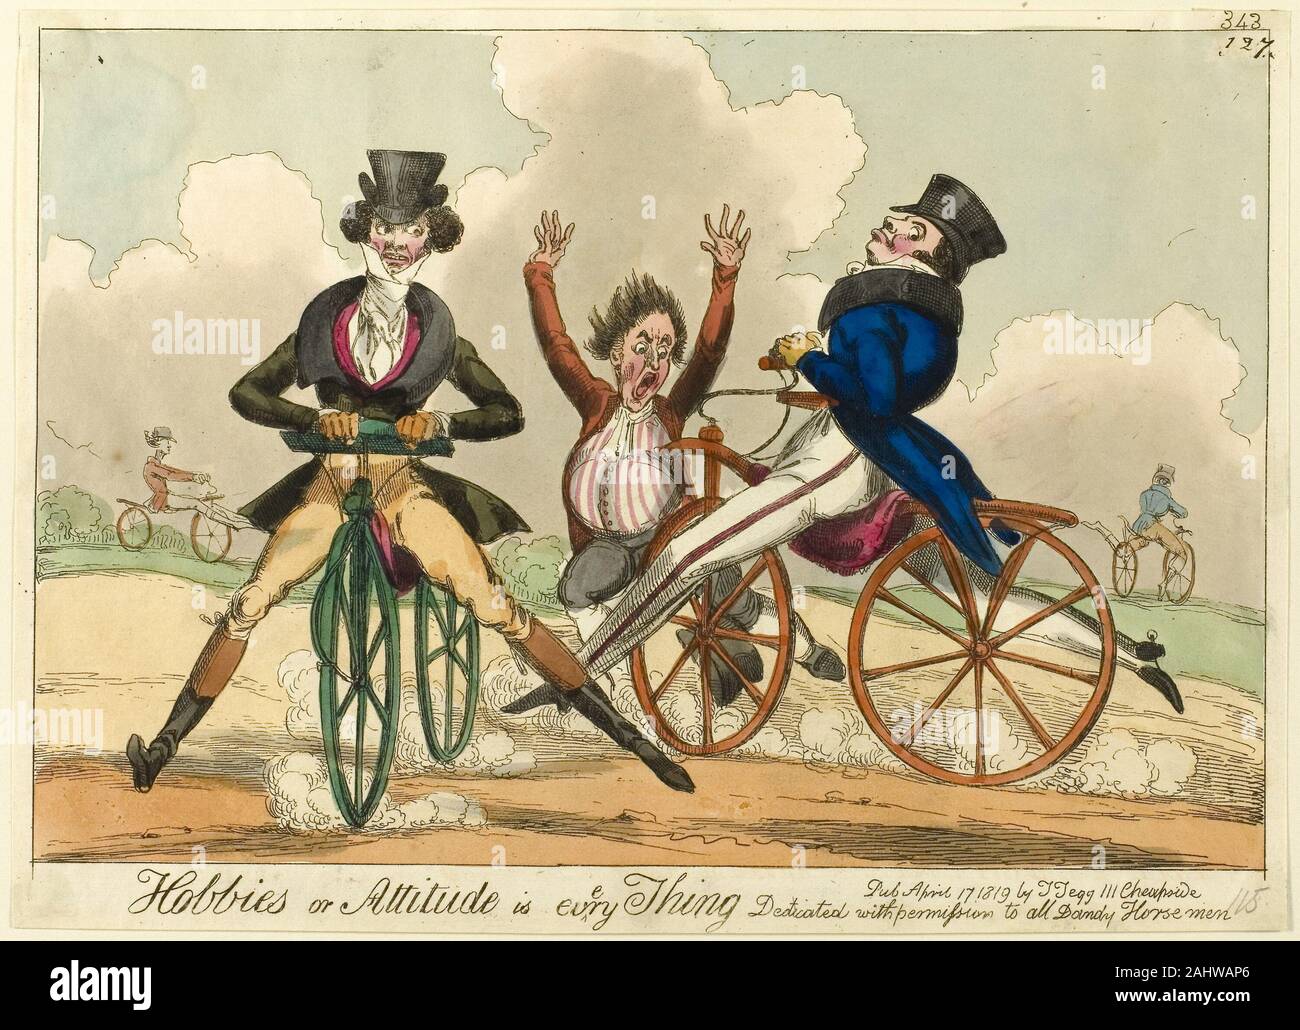 Thomas Tegg (Publisher). Hobbies or Attitude is Everything, Dedicated with permission to all Dandy Horsemen. 1819. England. Hand-colored etching on ivory wove paper Stock Photo